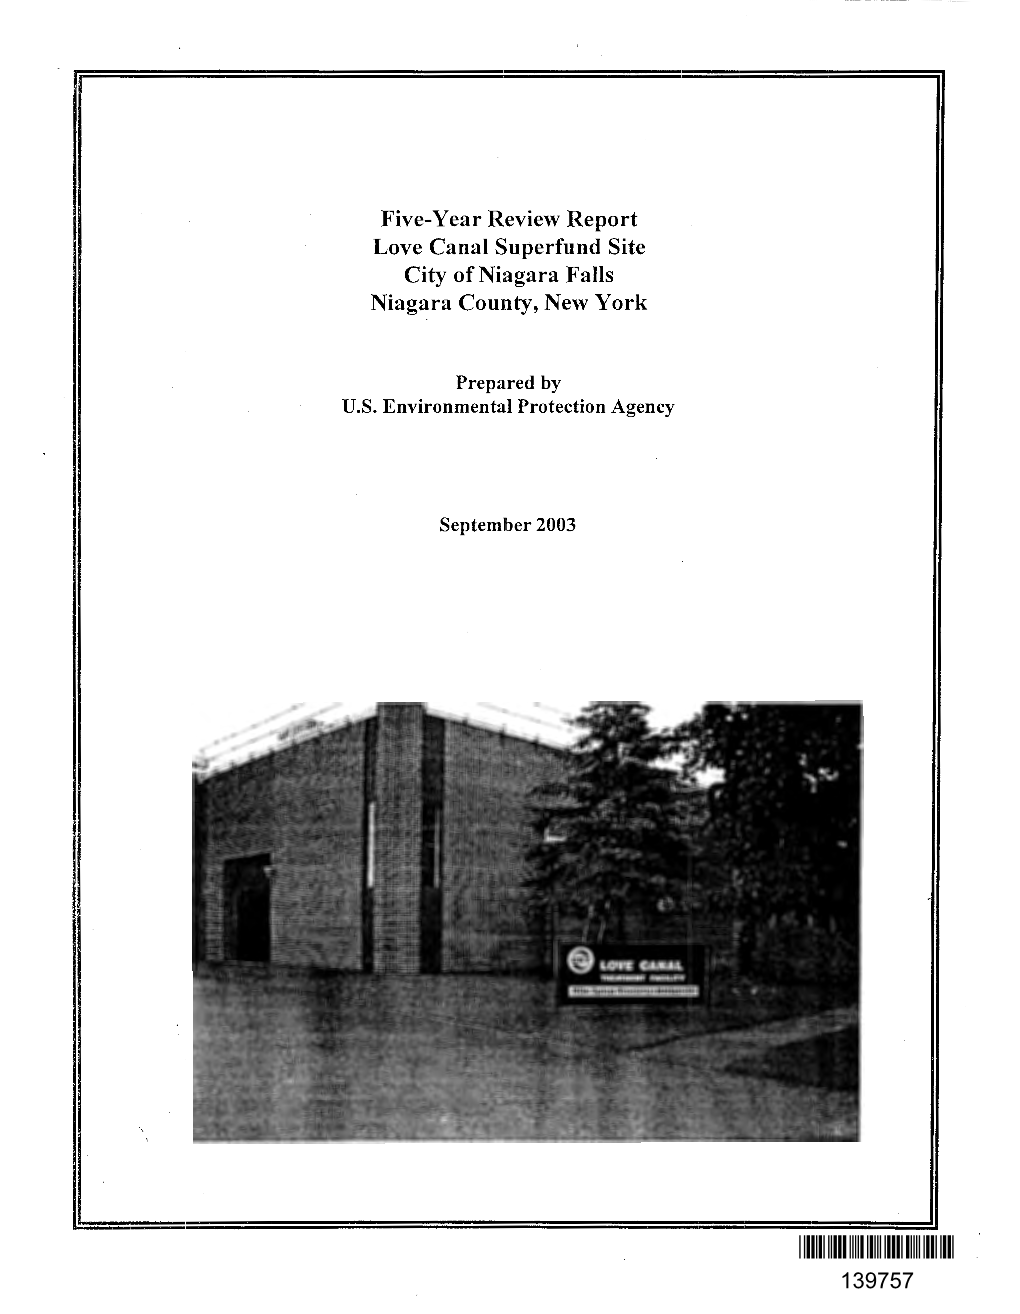 Five-Year Review Report, Love Canal Superfund Site, City